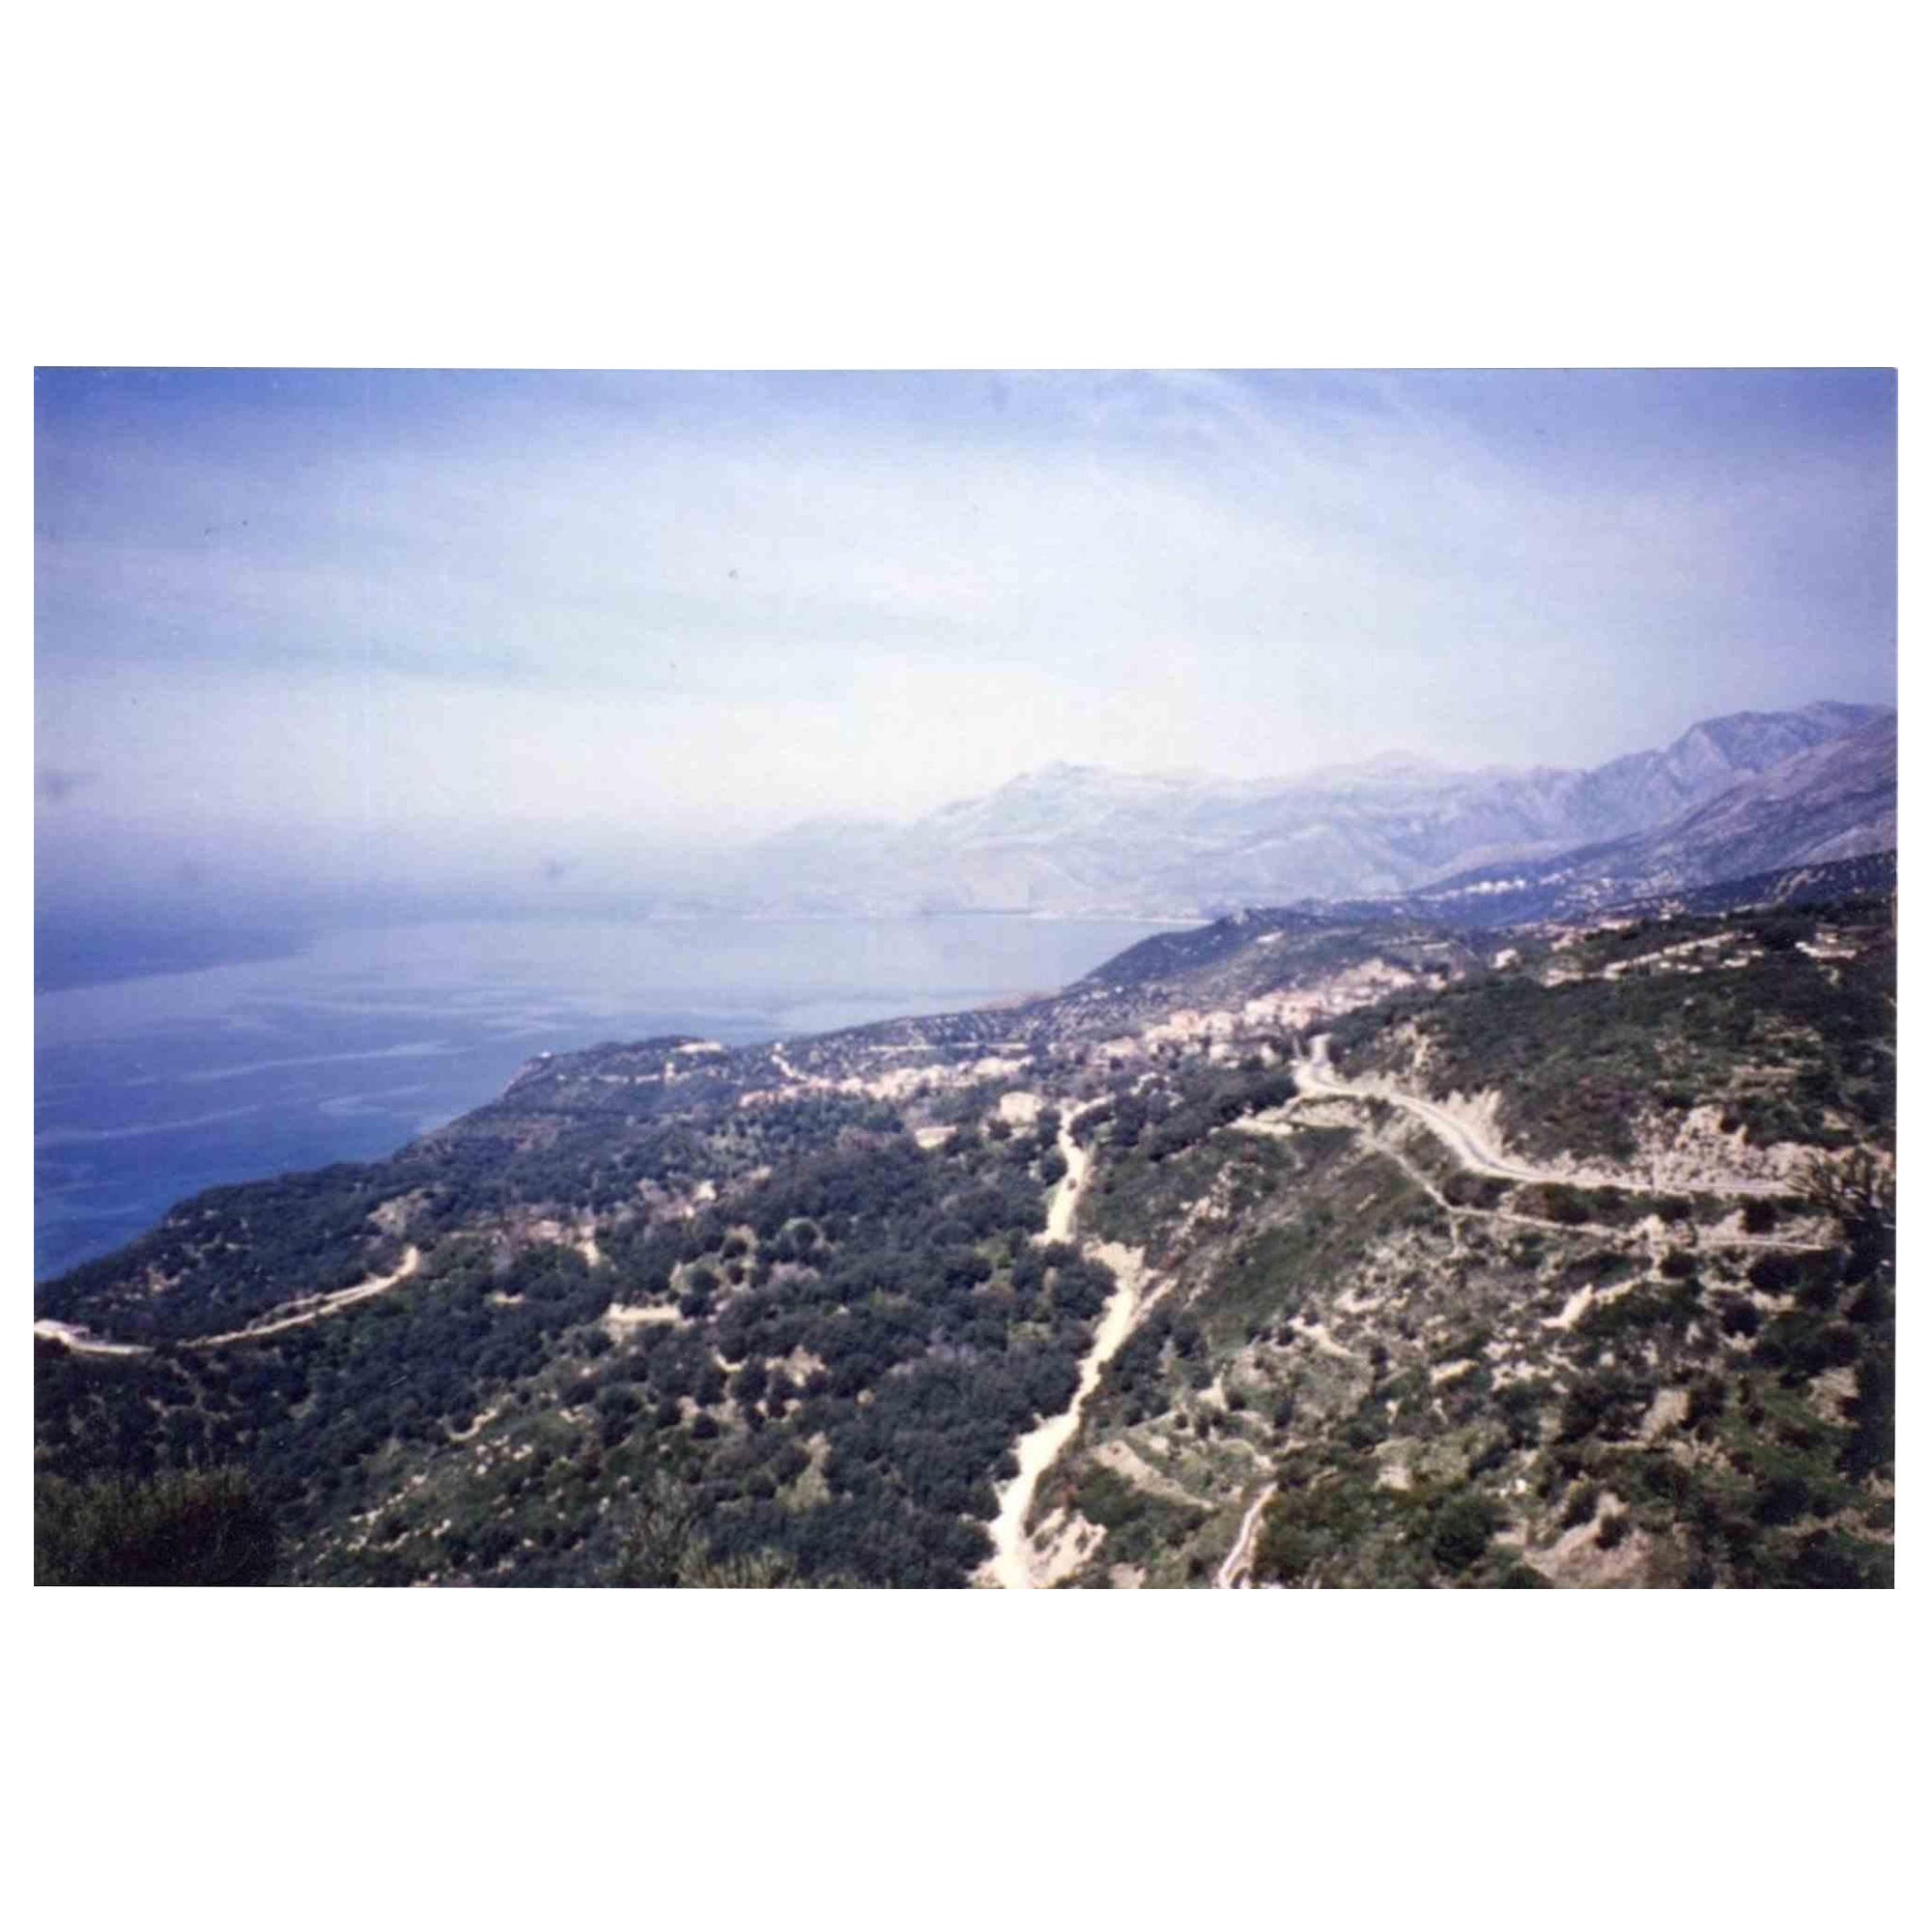 Unknown Landscape Photograph - Reportage from Albania - Lukova - Vintage Photograph - Late 1970s